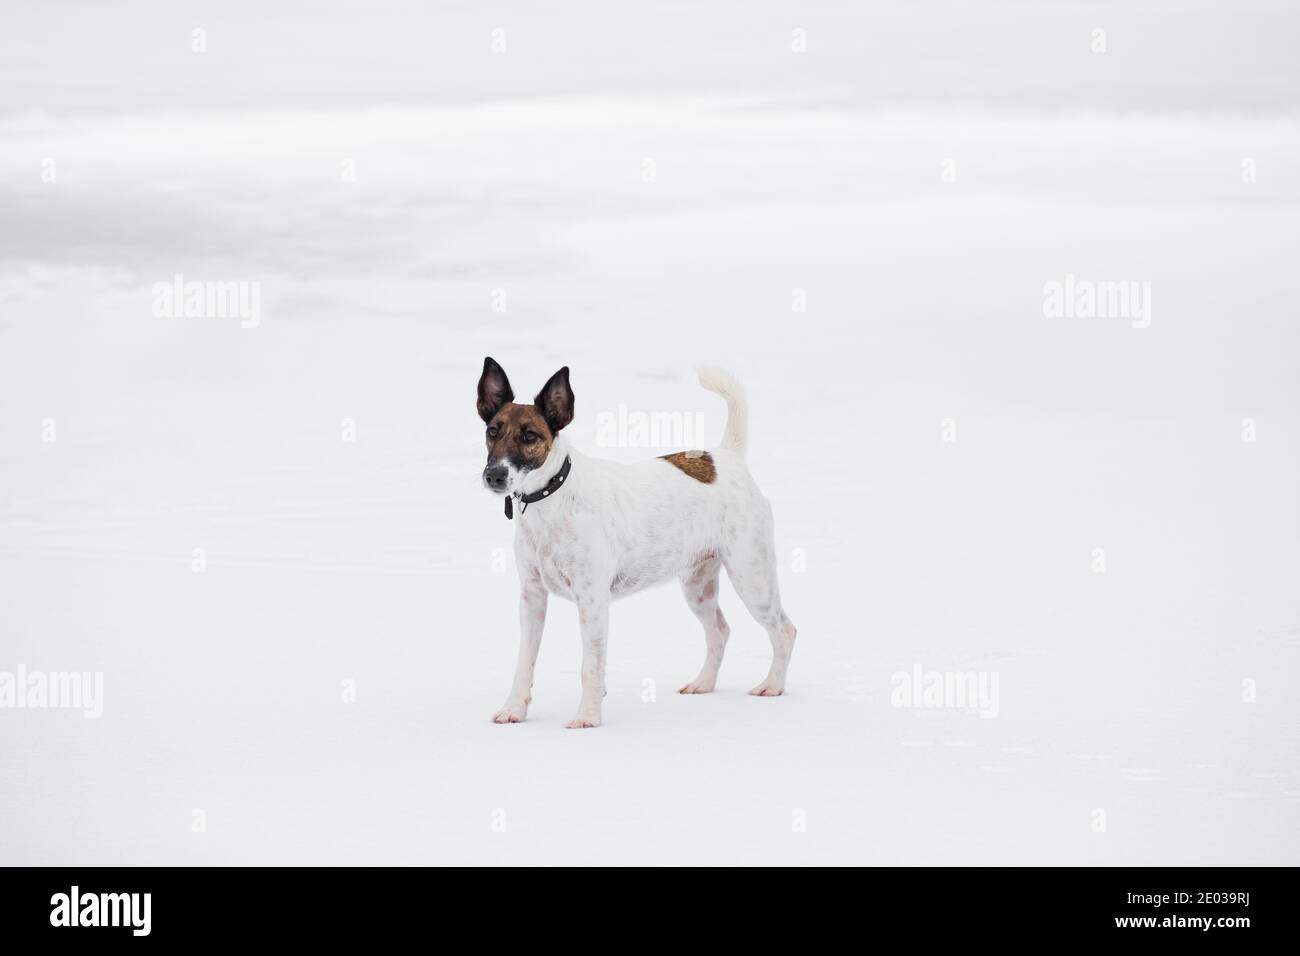 Fox terrier dog in the snowy white surround. Spending outdoor time with dogs in winter, cold season active lifestyle with pets Stock Photo